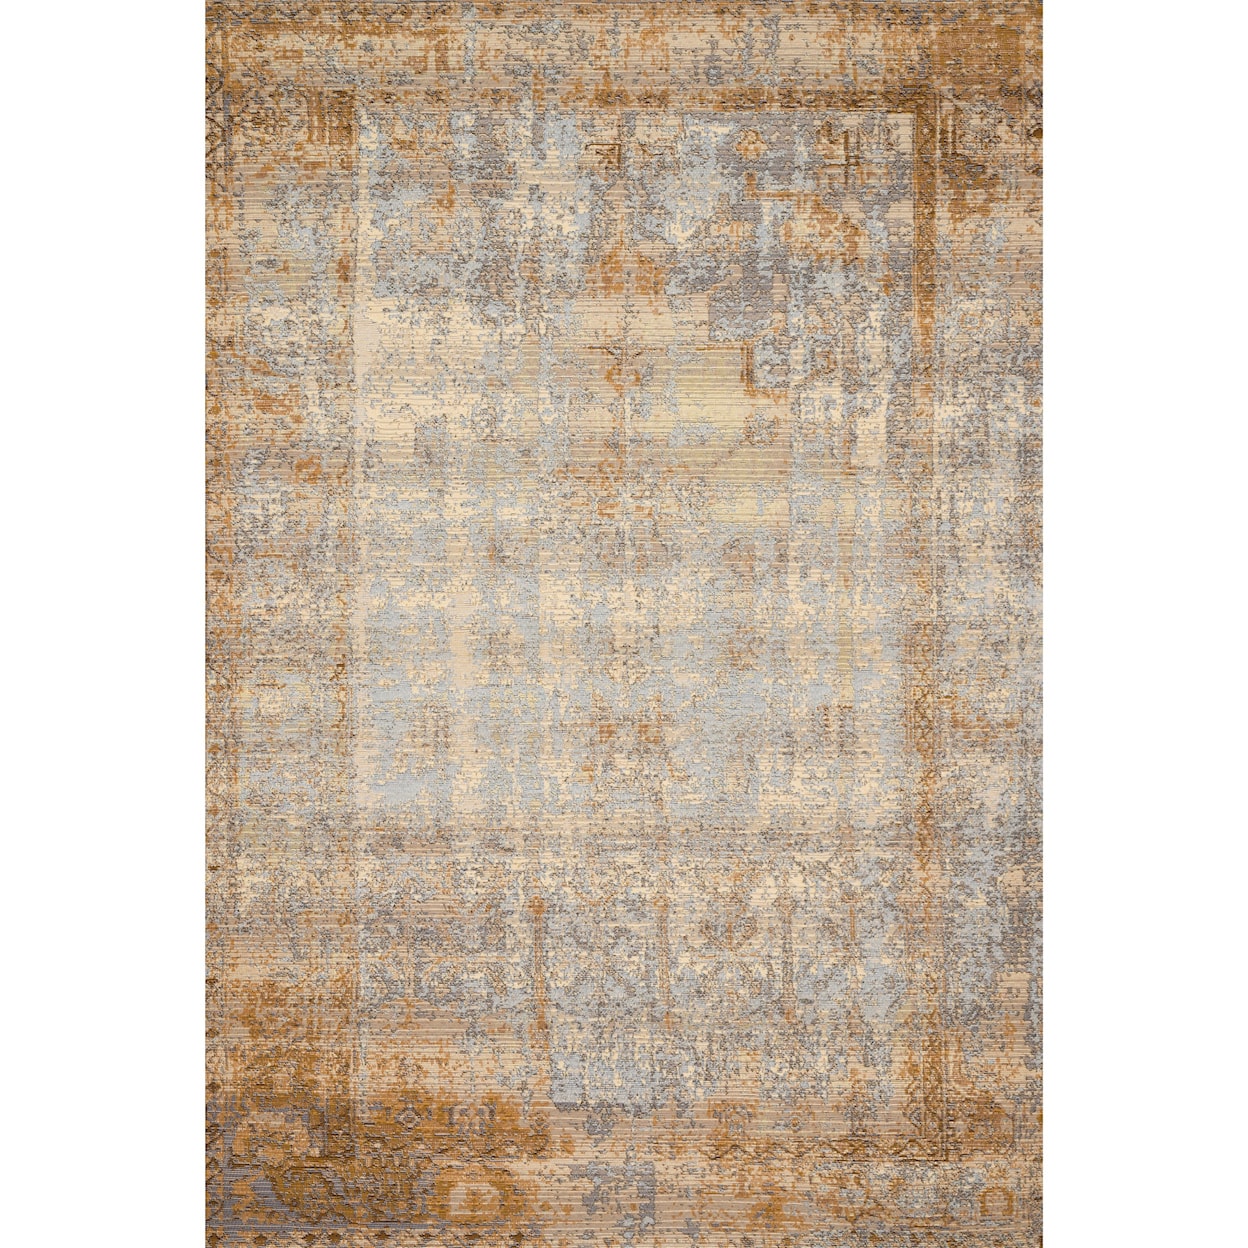 Loloi Rugs Mika 5'3" x 7'8" Ant. Ivory / Copper Rug